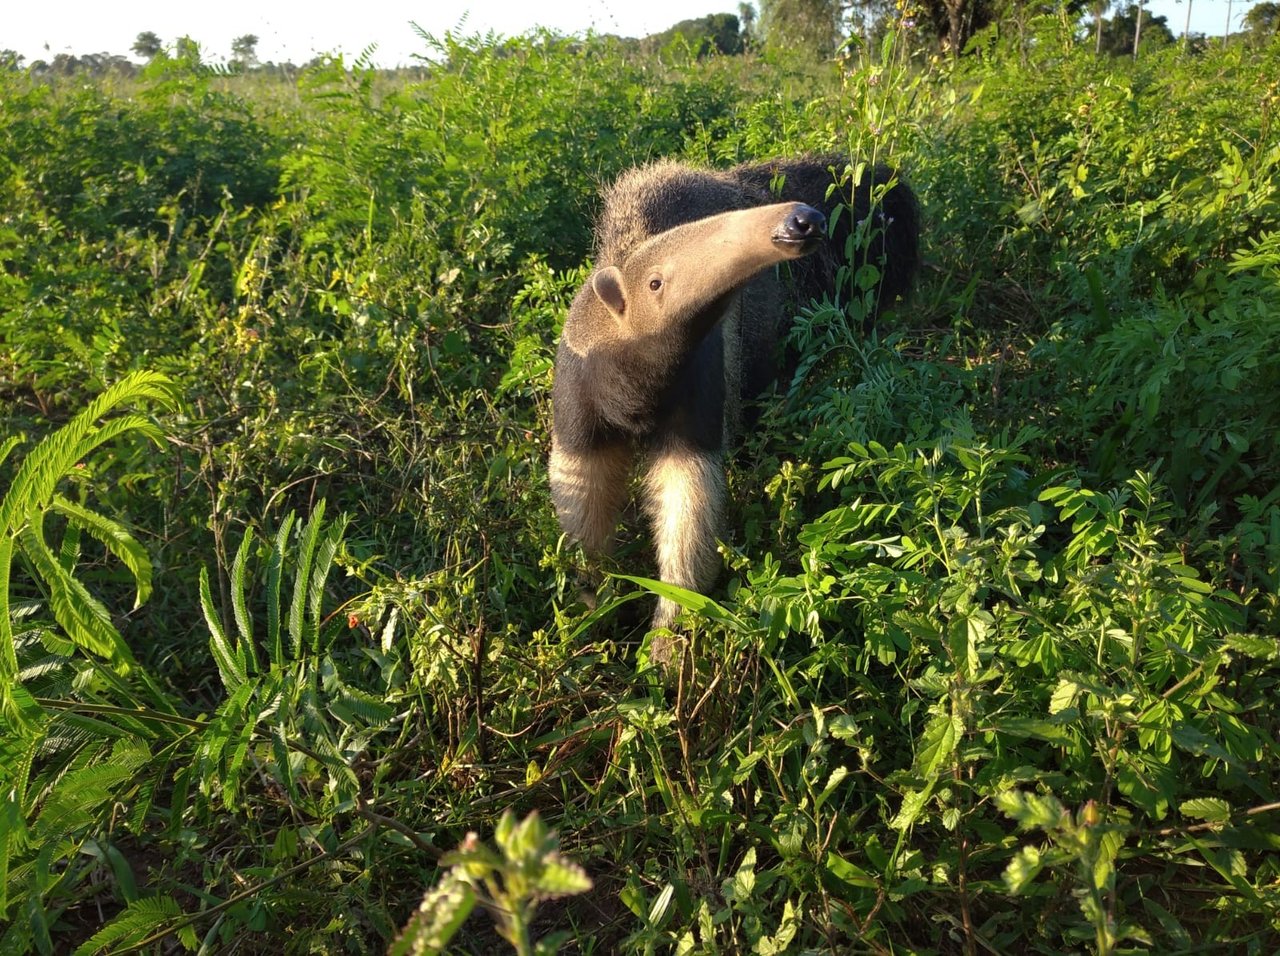 Cecilia baby giant anteater